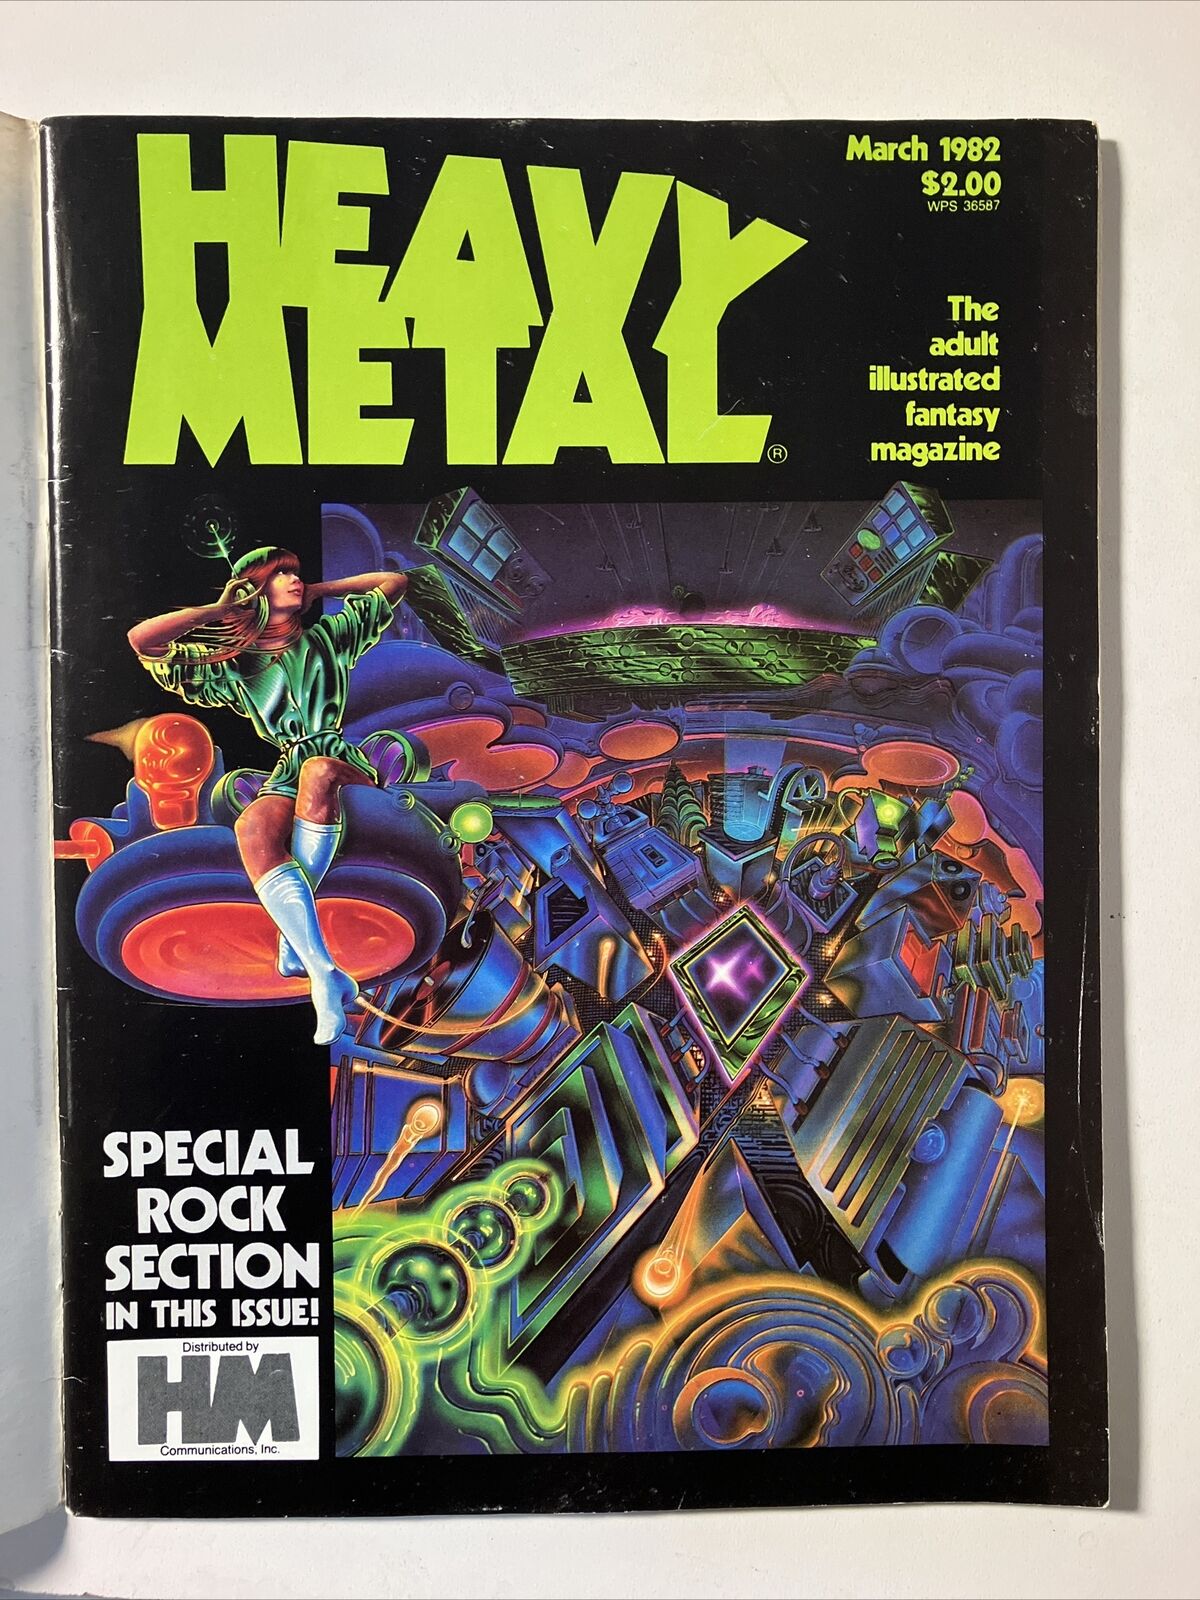 Heavy Metal Magazine March 1982 VG+ With original Subsciption Cover Still Intact